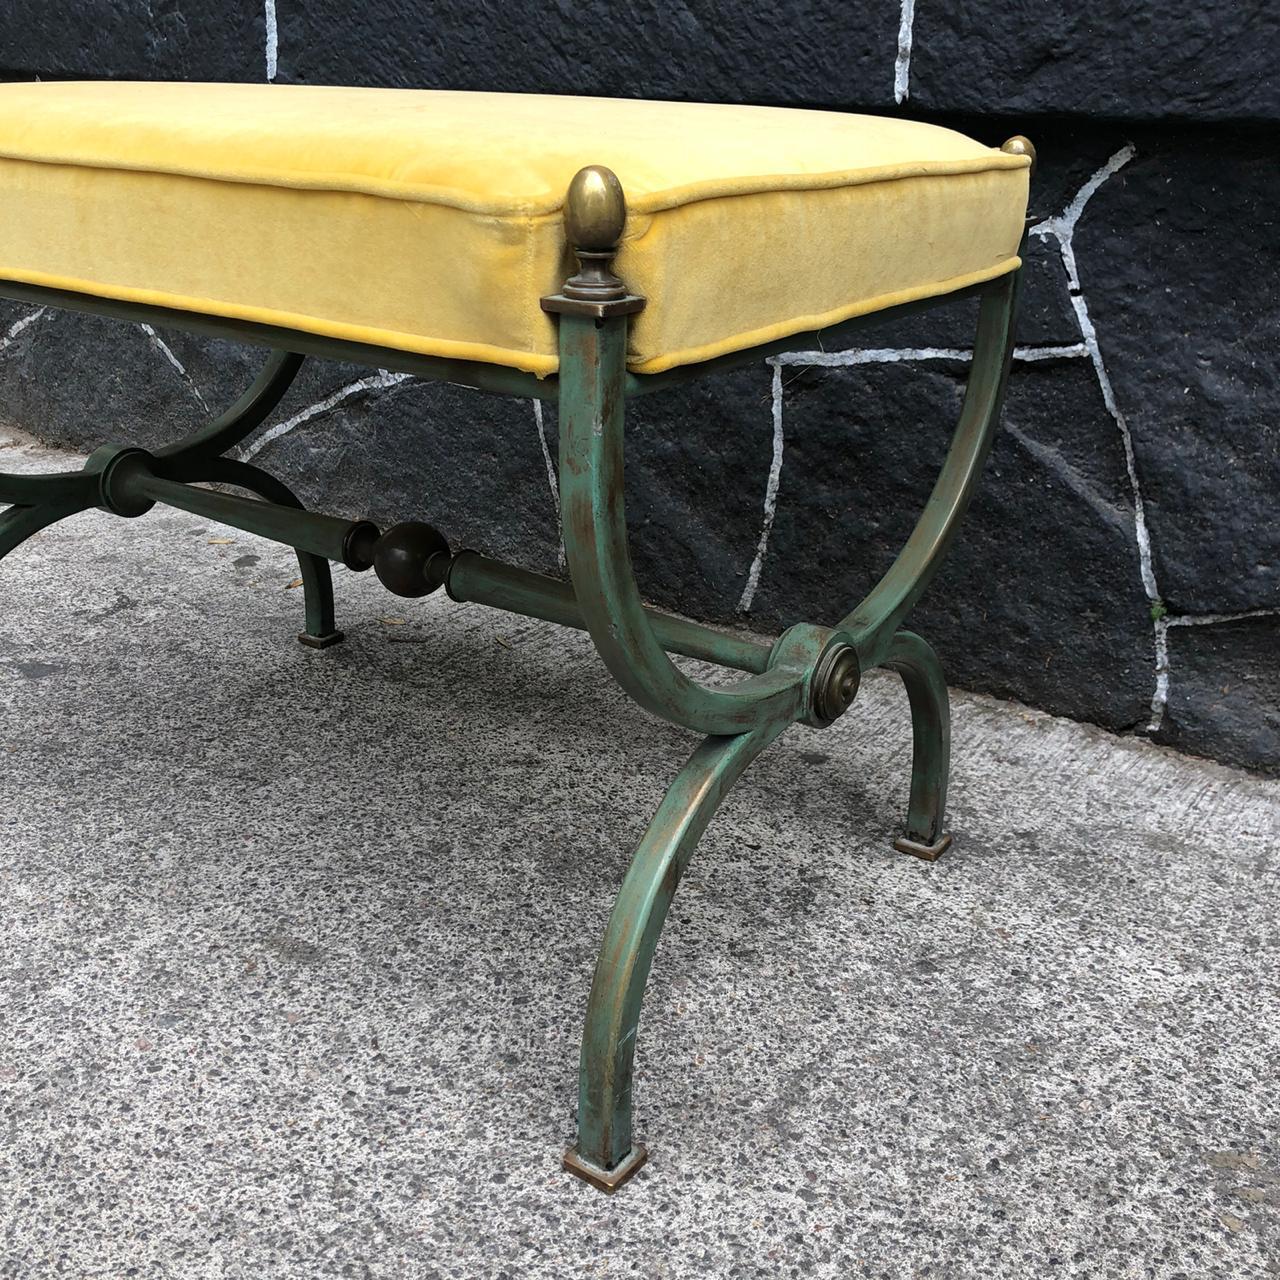 Mexican Mid-Century Modern patinated steel stool with brass details by Mexican designer Arturo Pani. The ottoman has been reupholstered with a fine yellow velvet fabric. The ottoman has a missing knob on the side.